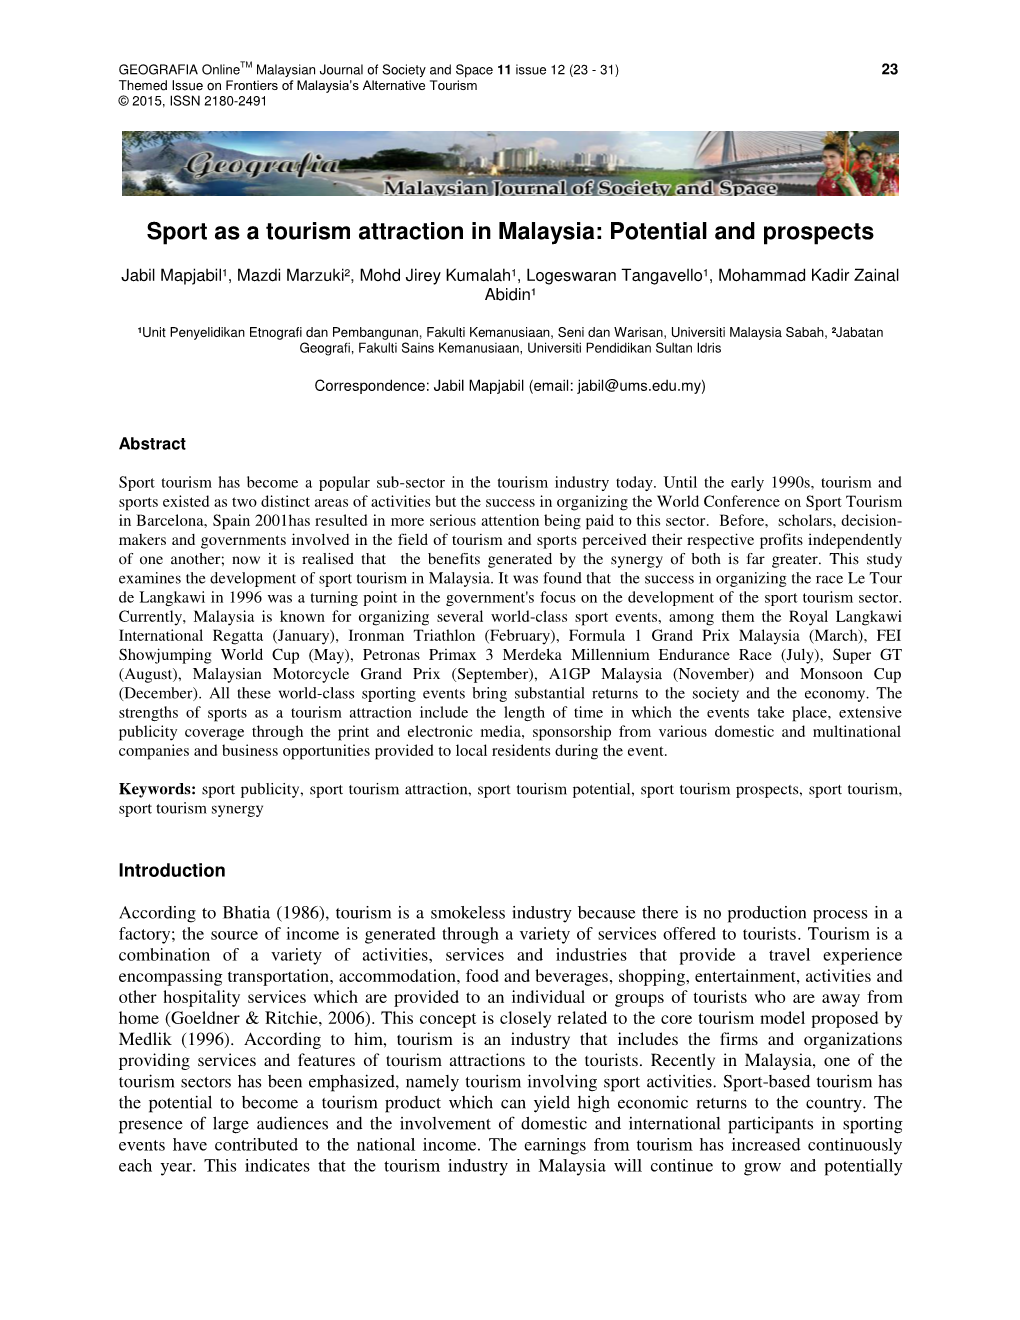 Sport As a Tourism Attraction in Malaysia: Potential and Prospects